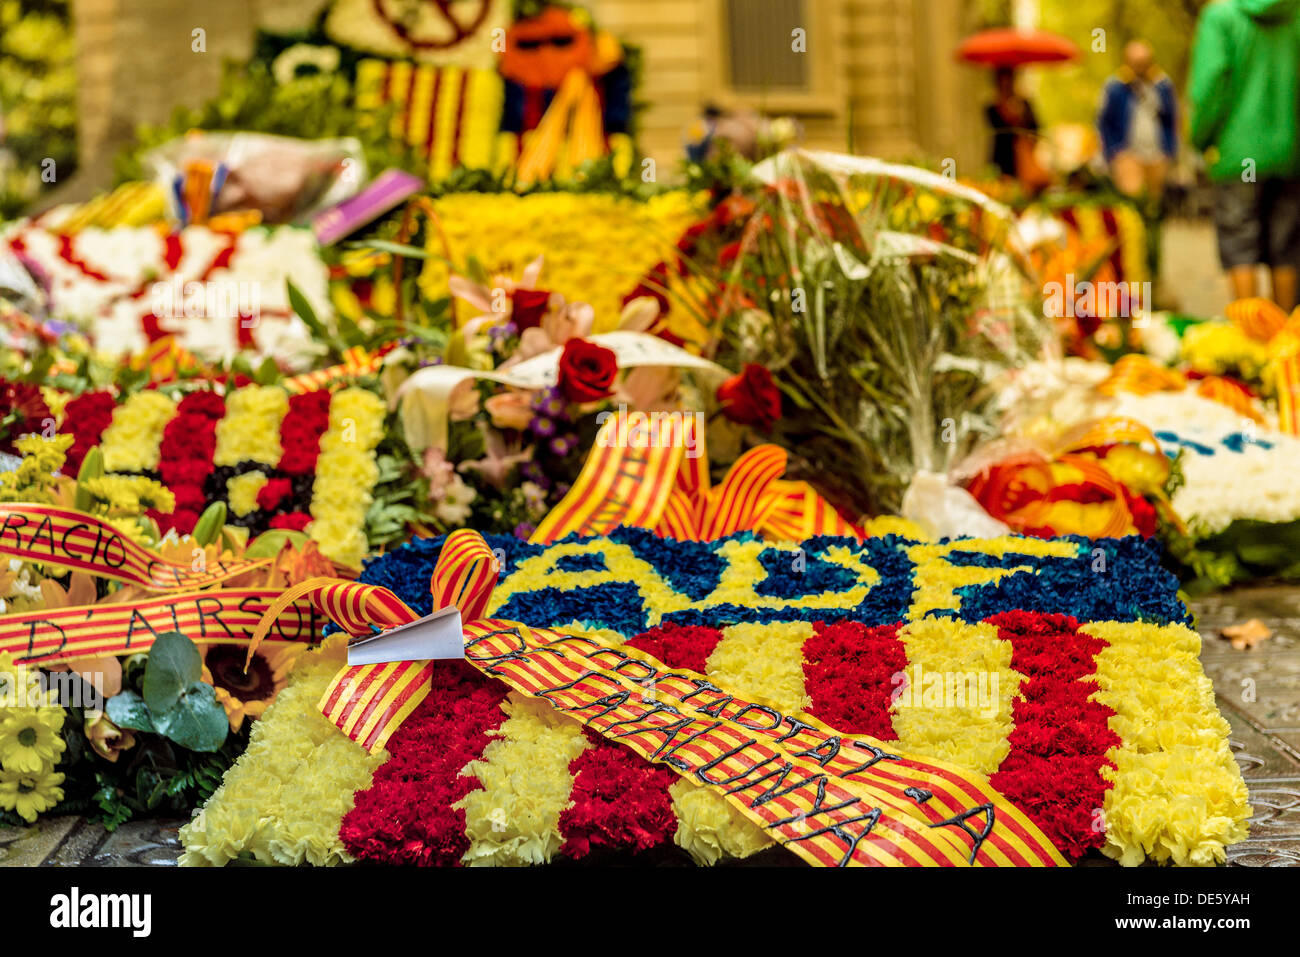 Barcelona, Spain. September 11th, 2013: A multitude of institutional, civil, cultural and sportive associations have offered flower arrangements to the Monument of Rafael Casanova, mayor of Barcelona and commander in chief of Catalonia during the Siege of Barcelona in 1714 © matthi/Alamy Live News Stock Photo